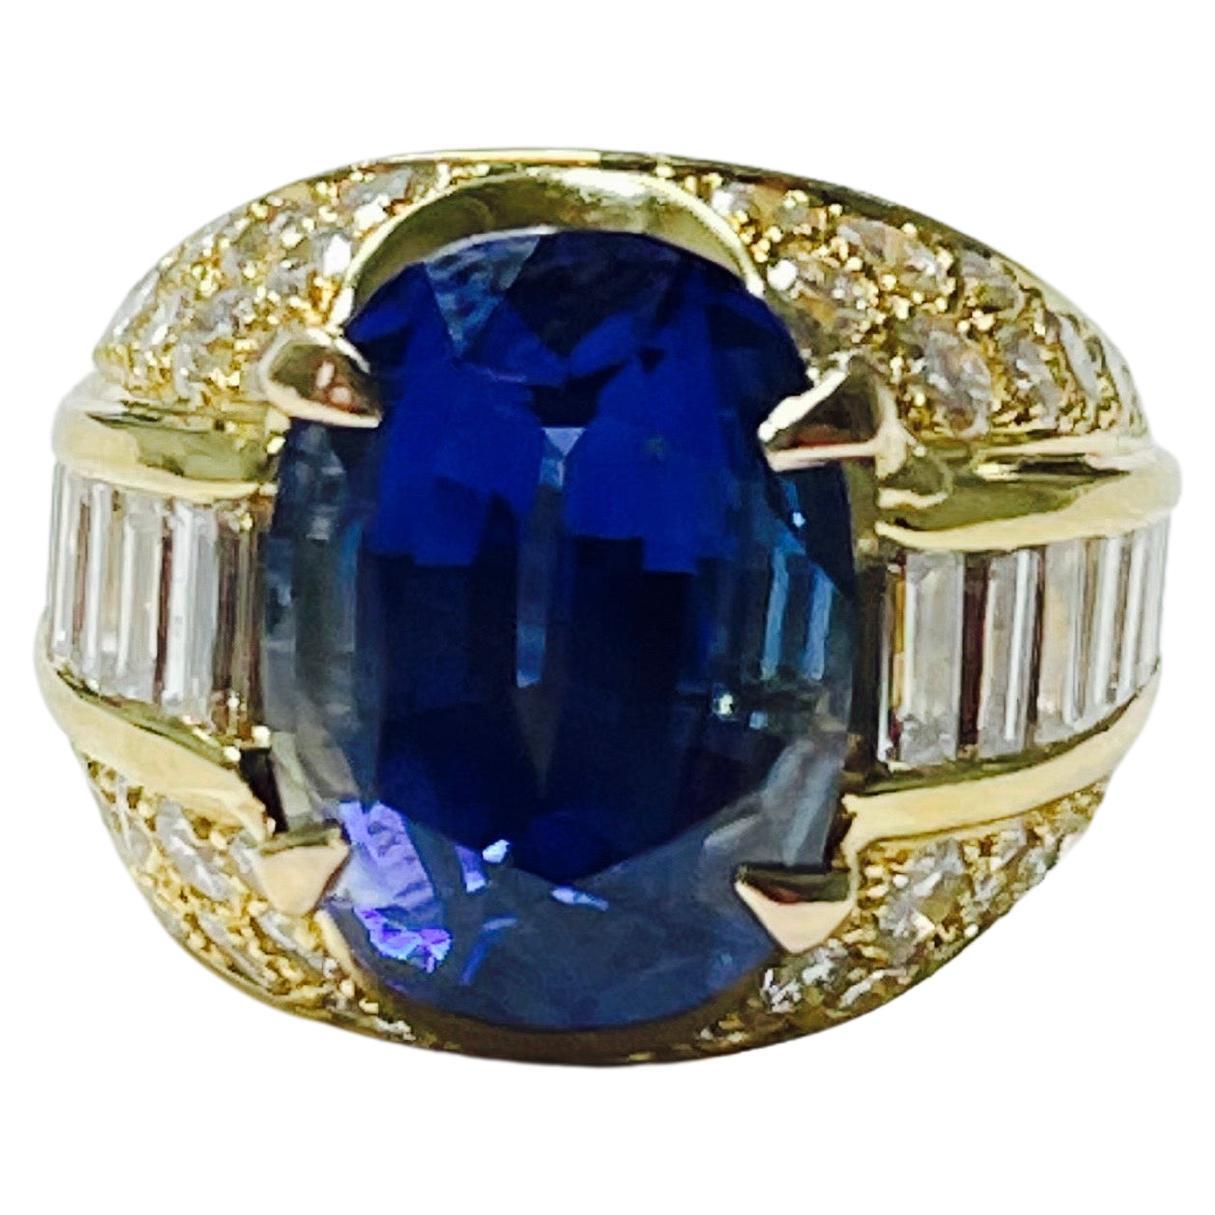 AGL certified 8.02 carats No heat blue sapphire and diamond engagement ring handcrafted in 18K yellow gold. 
The details are as follows : 
Blue sapphire : 8.02 carats 
Blue sapphire origin : Madagascar 
Treatments : No heat 
Gorgeous blue color